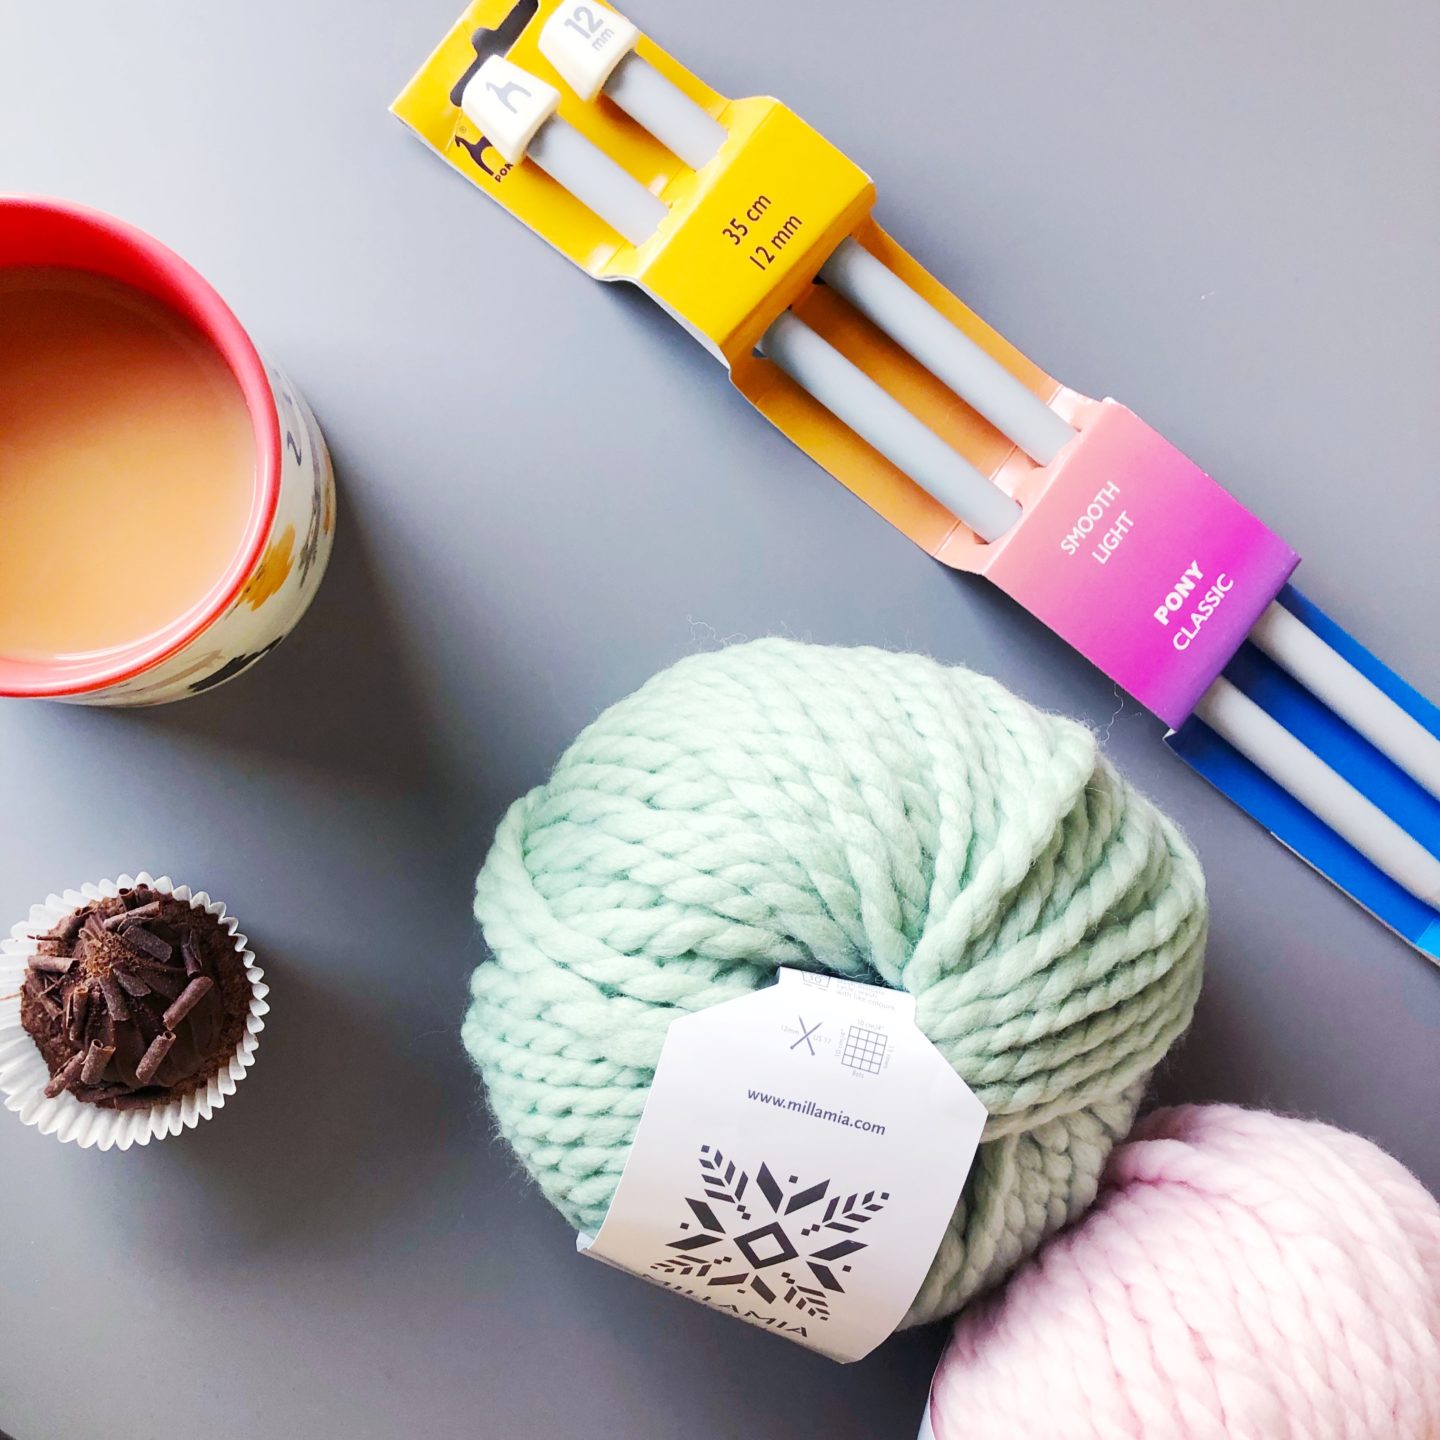 flatly of mint green and pale pink Millamia balls of wool with size 12 knitting needles, a cup of tea and a mini cupcake on a grey background